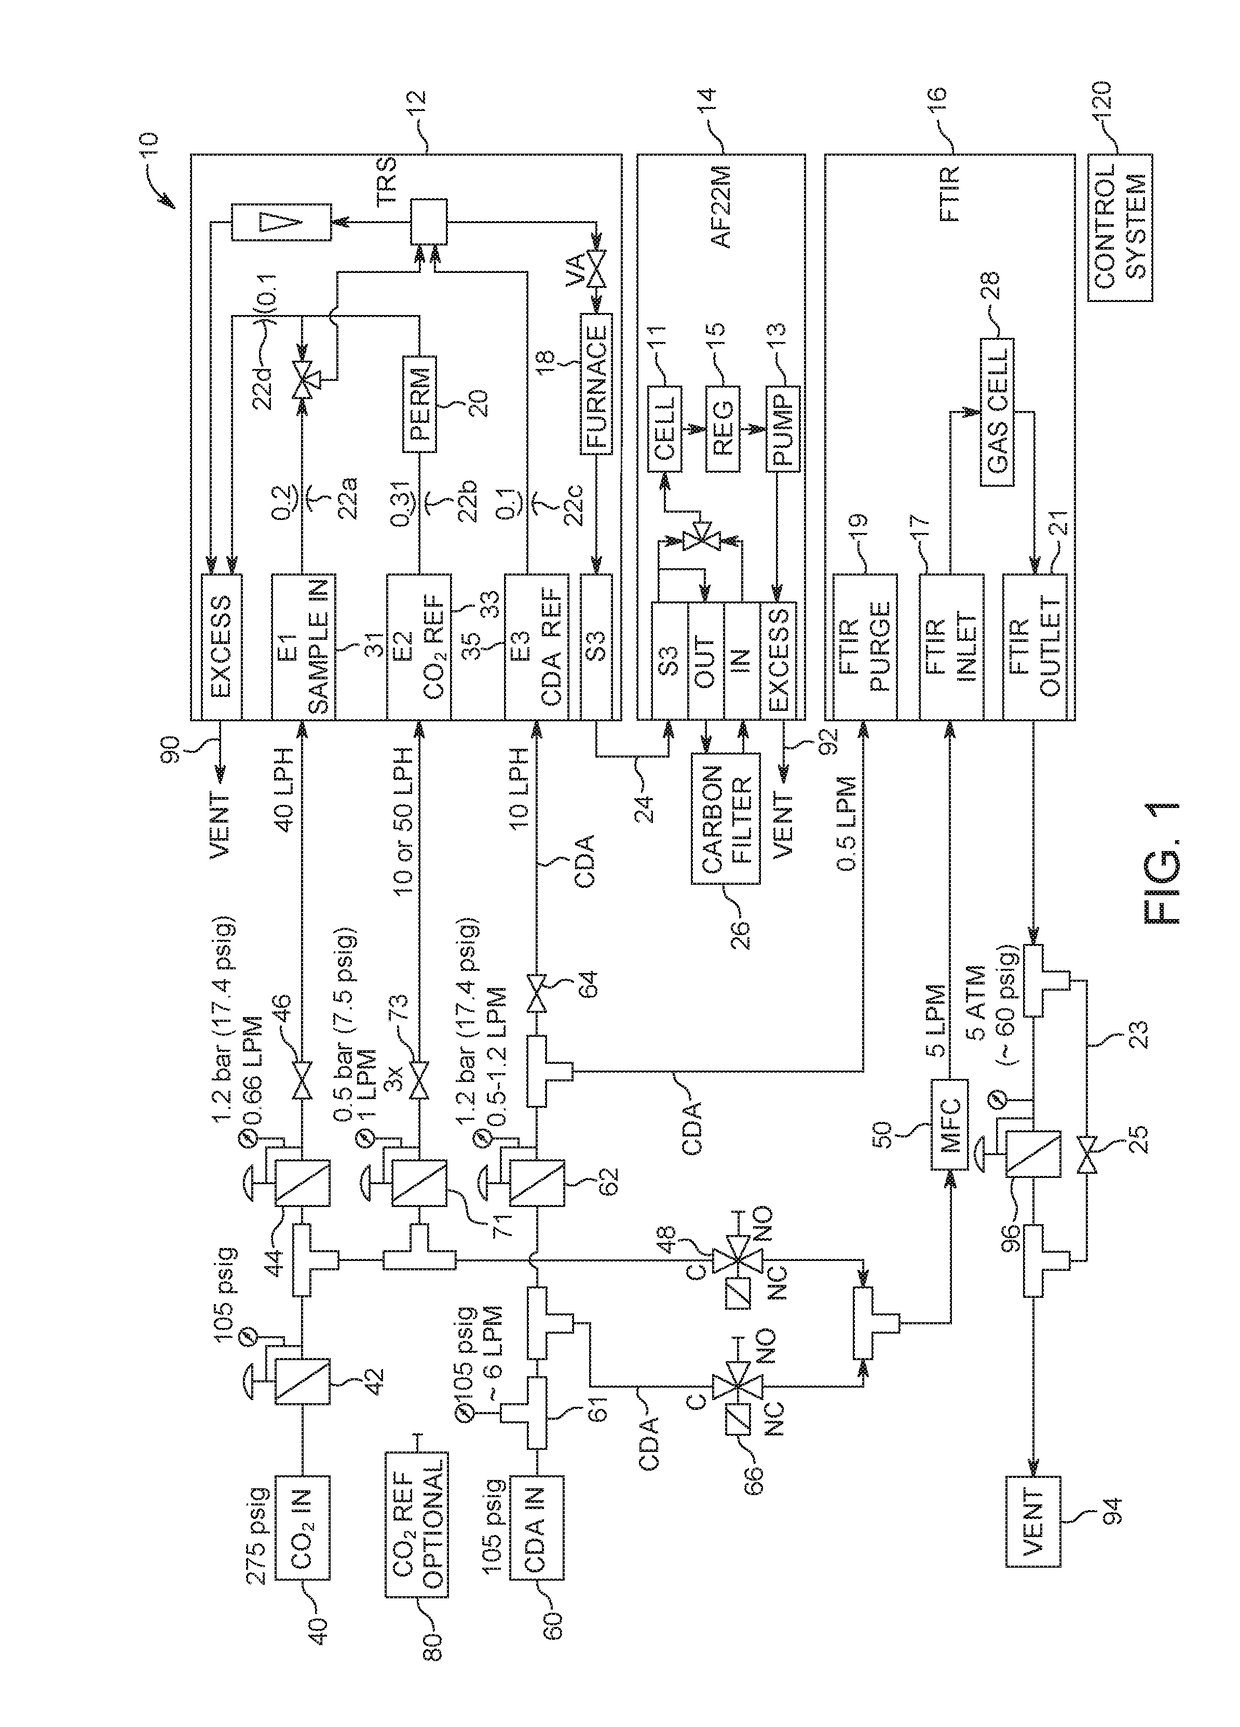 System and method for impurity detection in beverage grade gases